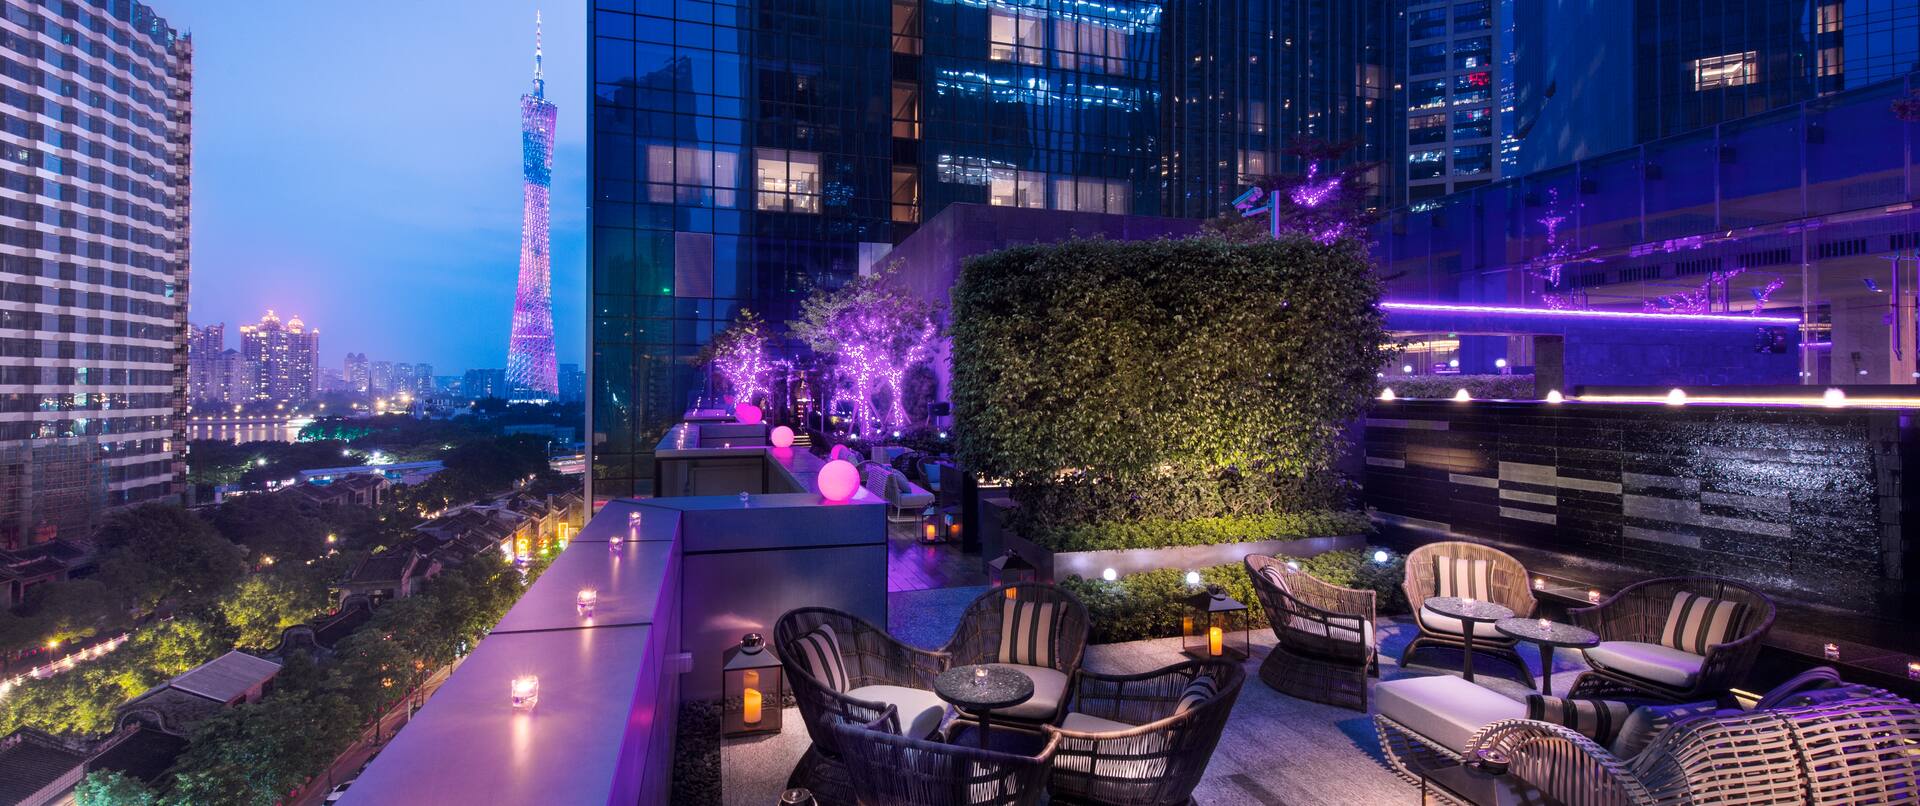 Rooftop Bar seating area with views of city